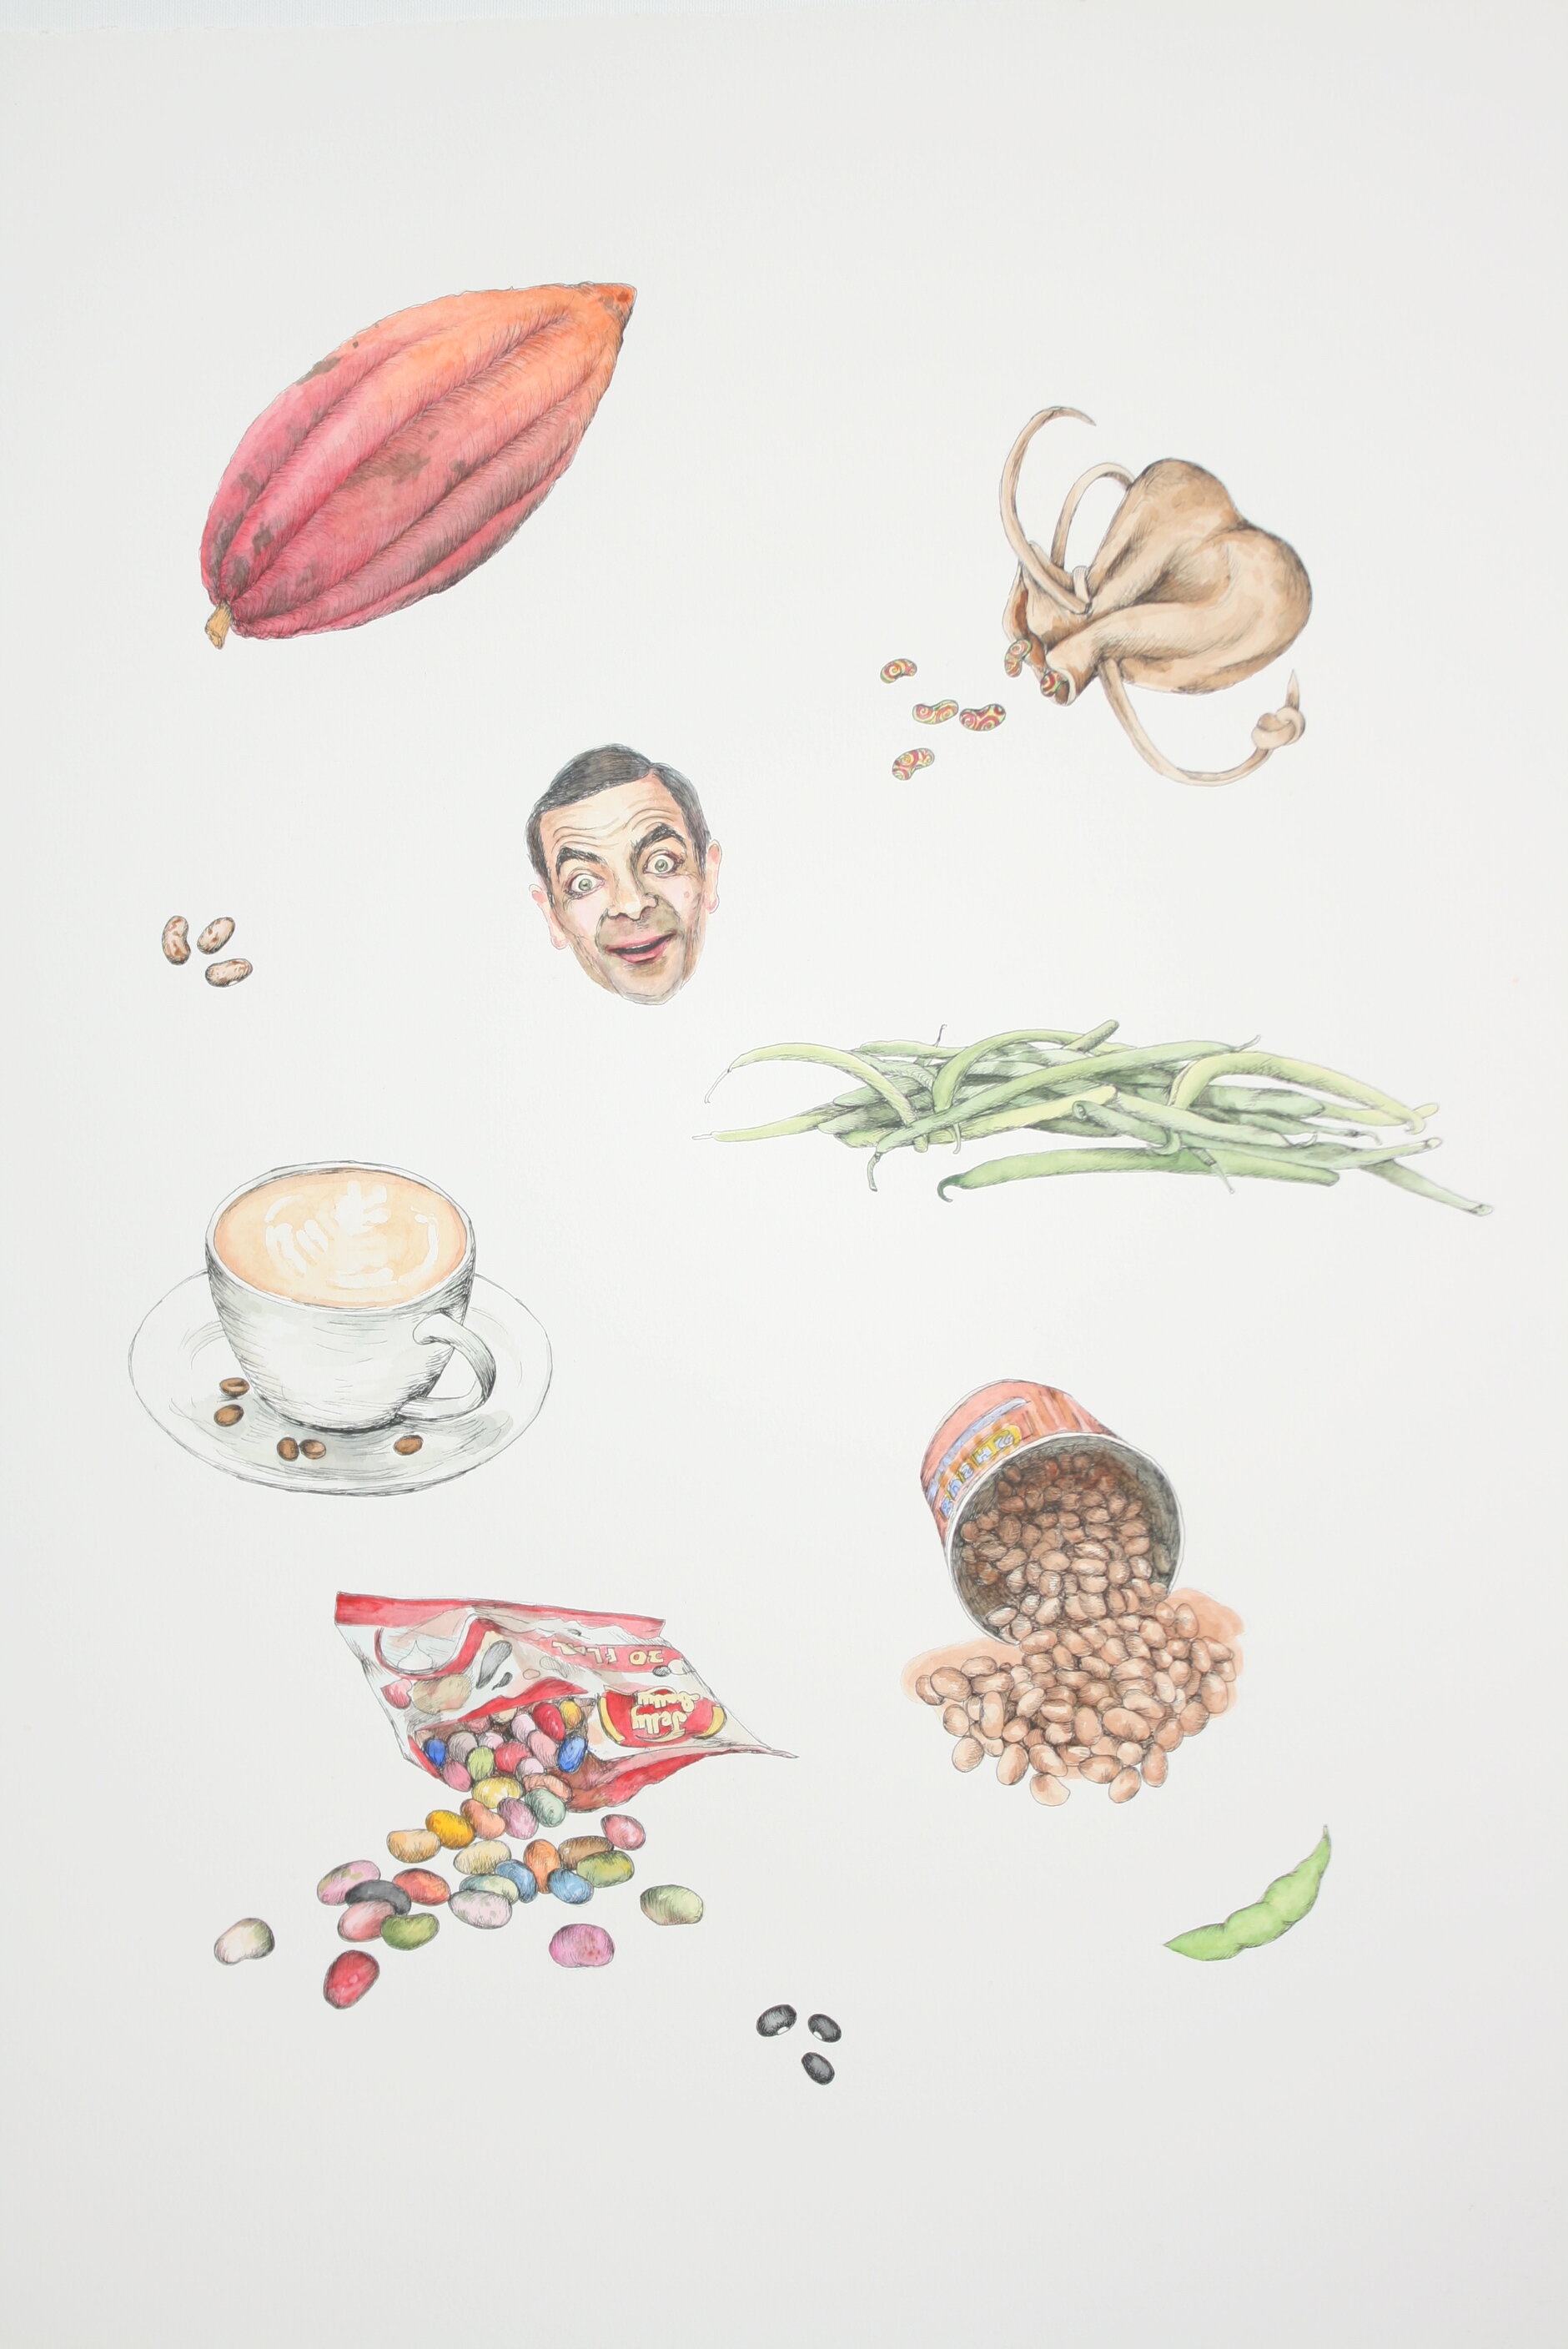  Daniela Koontz,&nbsp; Beans , 2017, watercolor and ink on Arches paper, 30 x 22 inches, Loan Courtesy of the Artist 